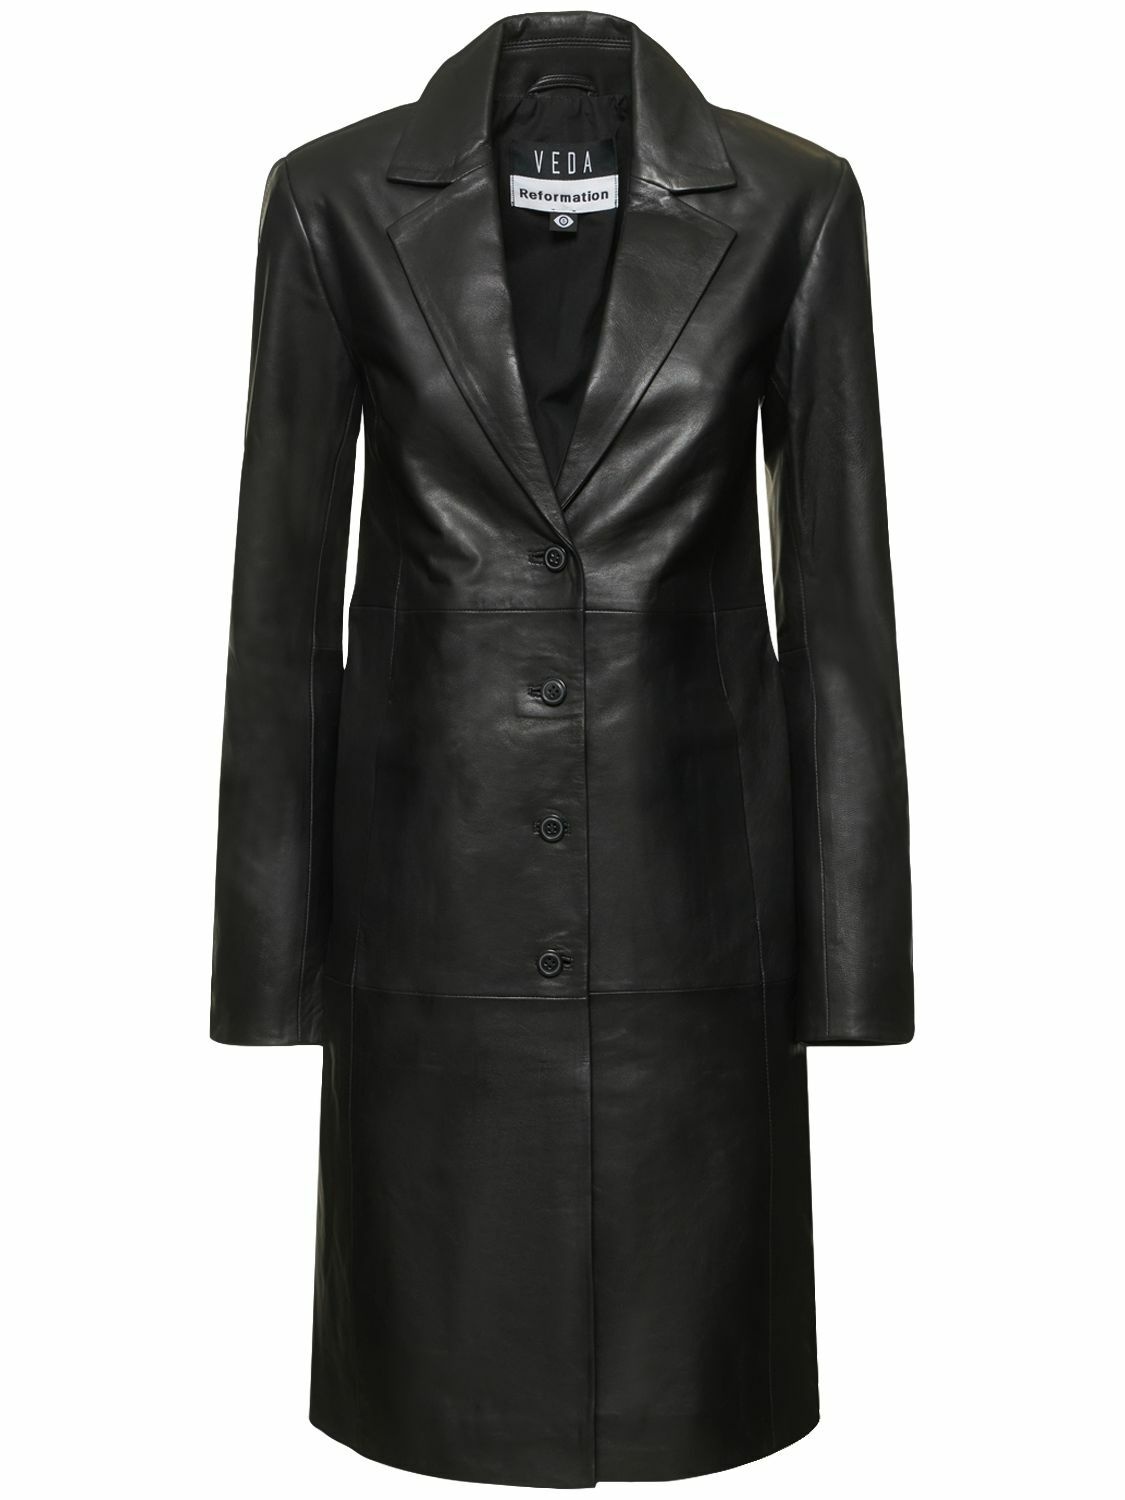 Photo: REFORMATION - Veda Crosby Leather Trench Coat